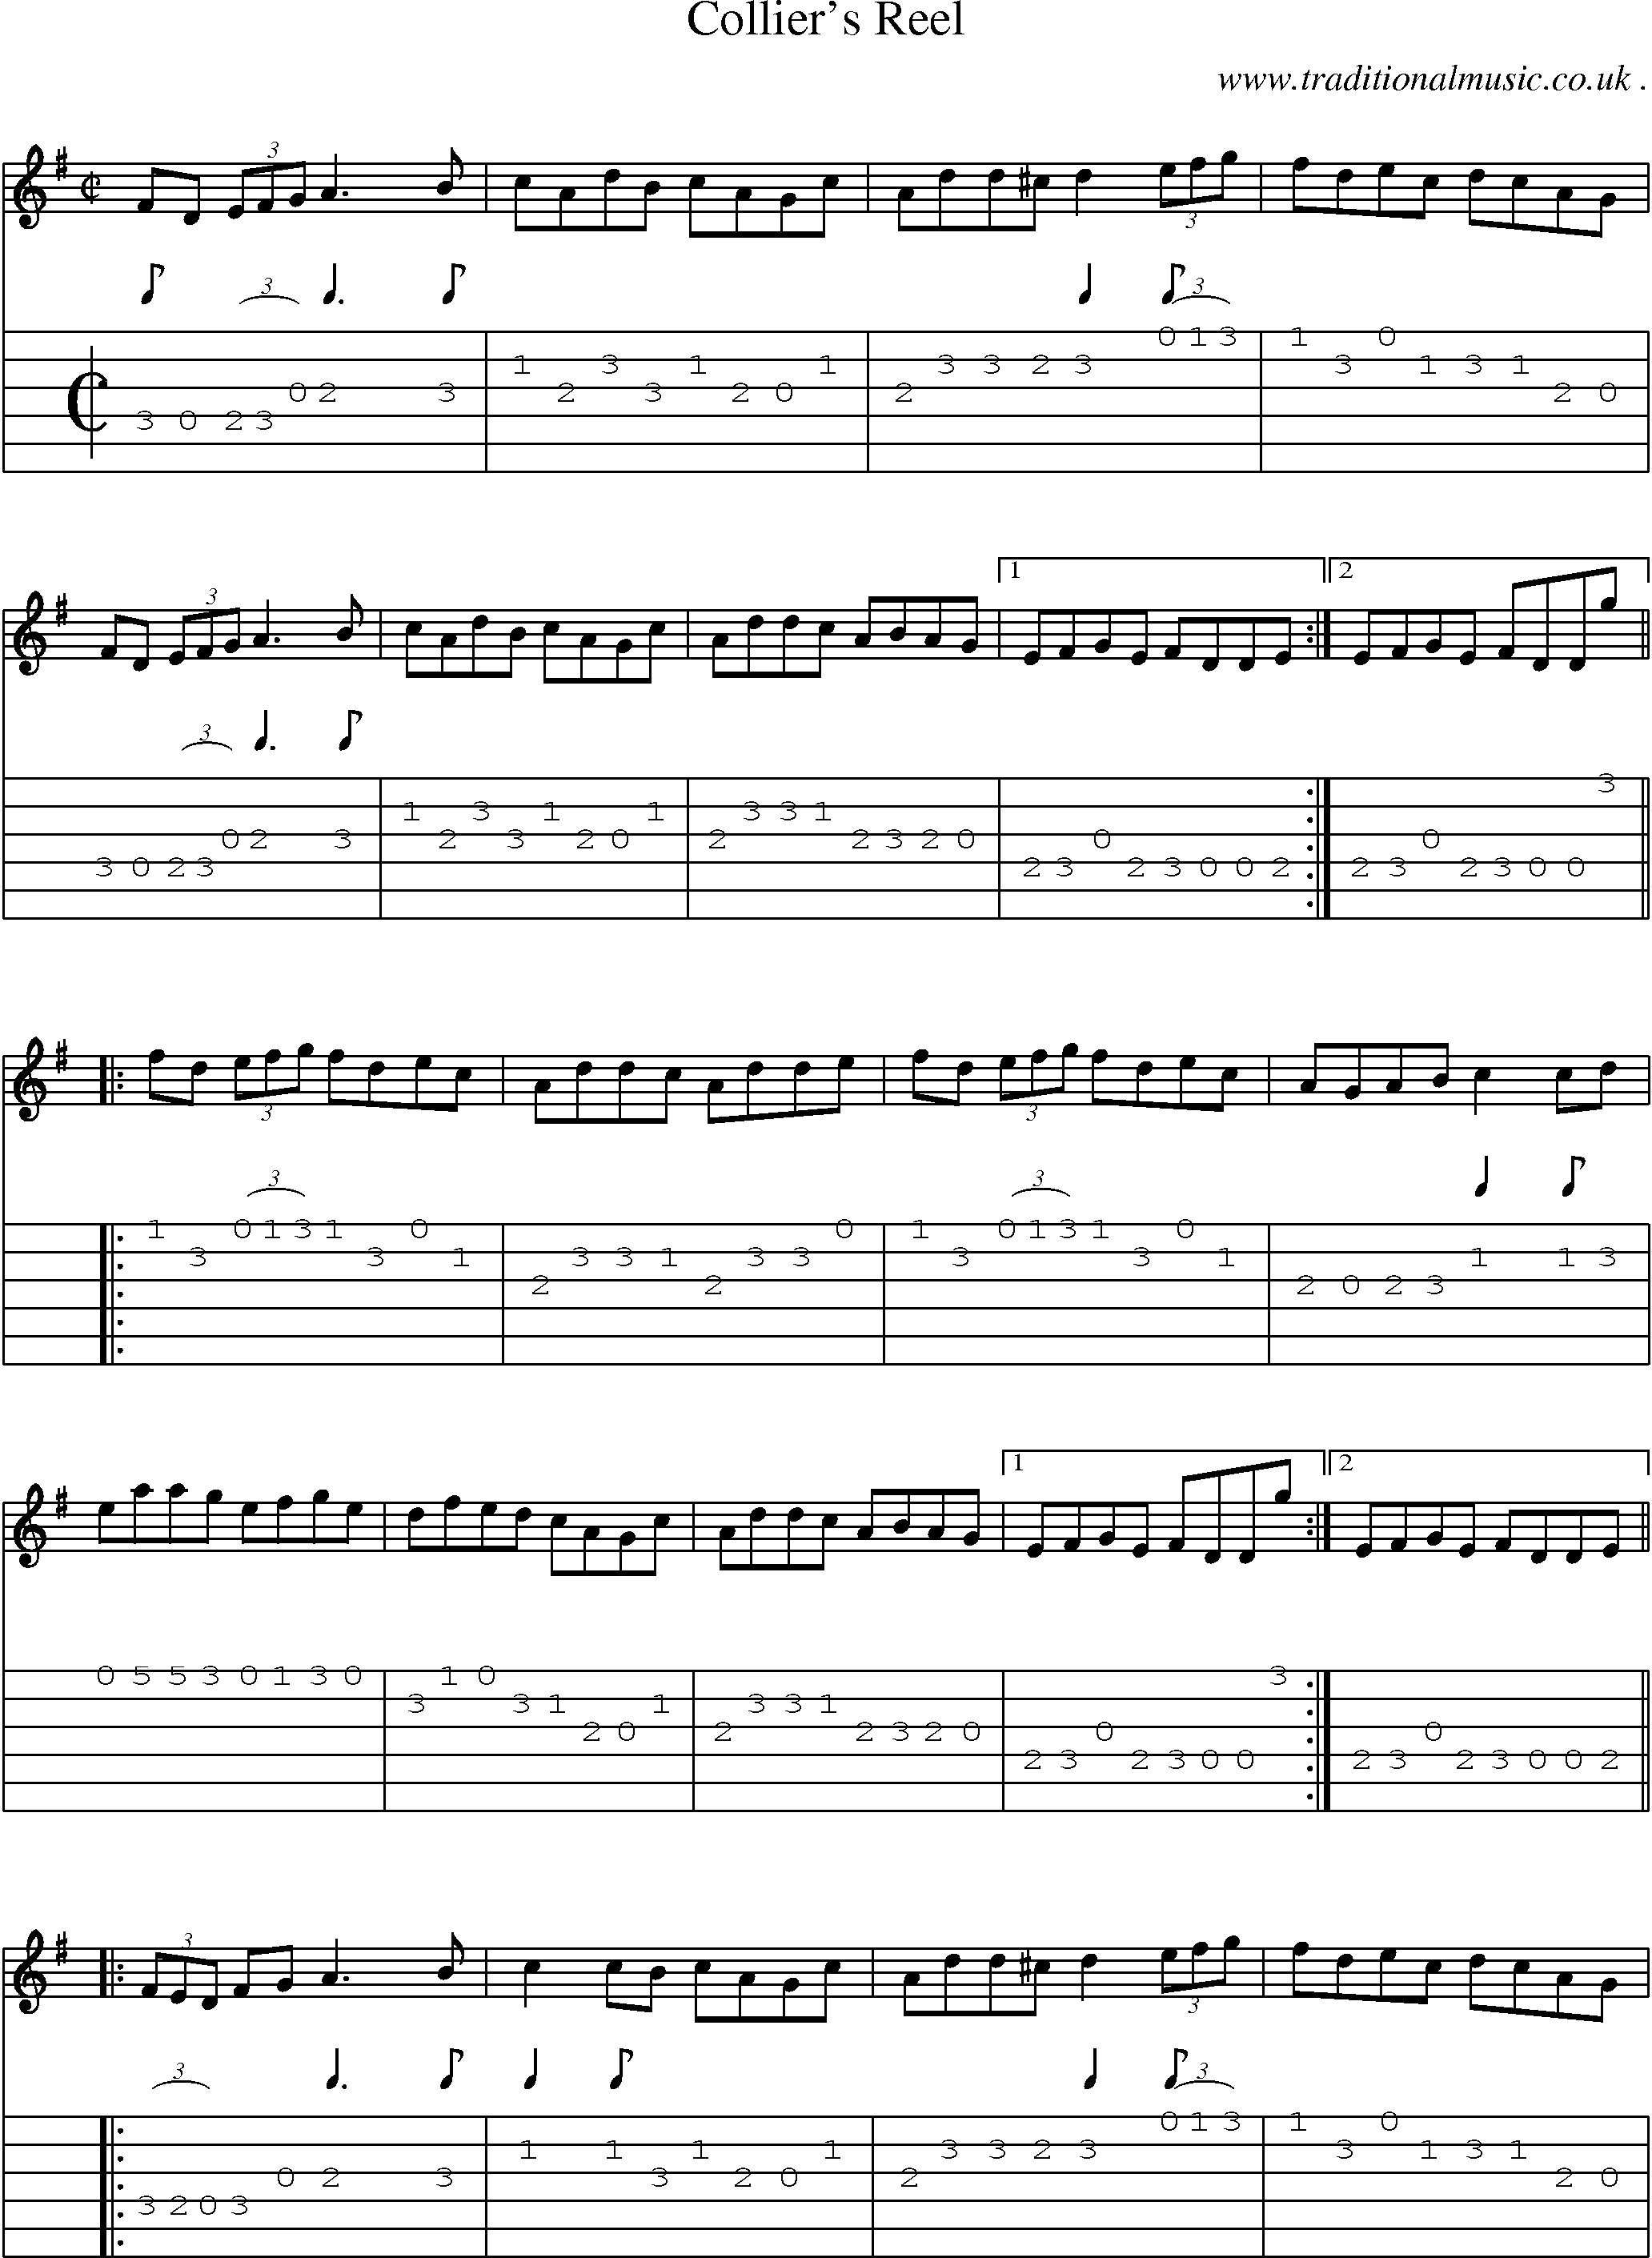 Sheet-Music and Guitar Tabs for Colliers Reel